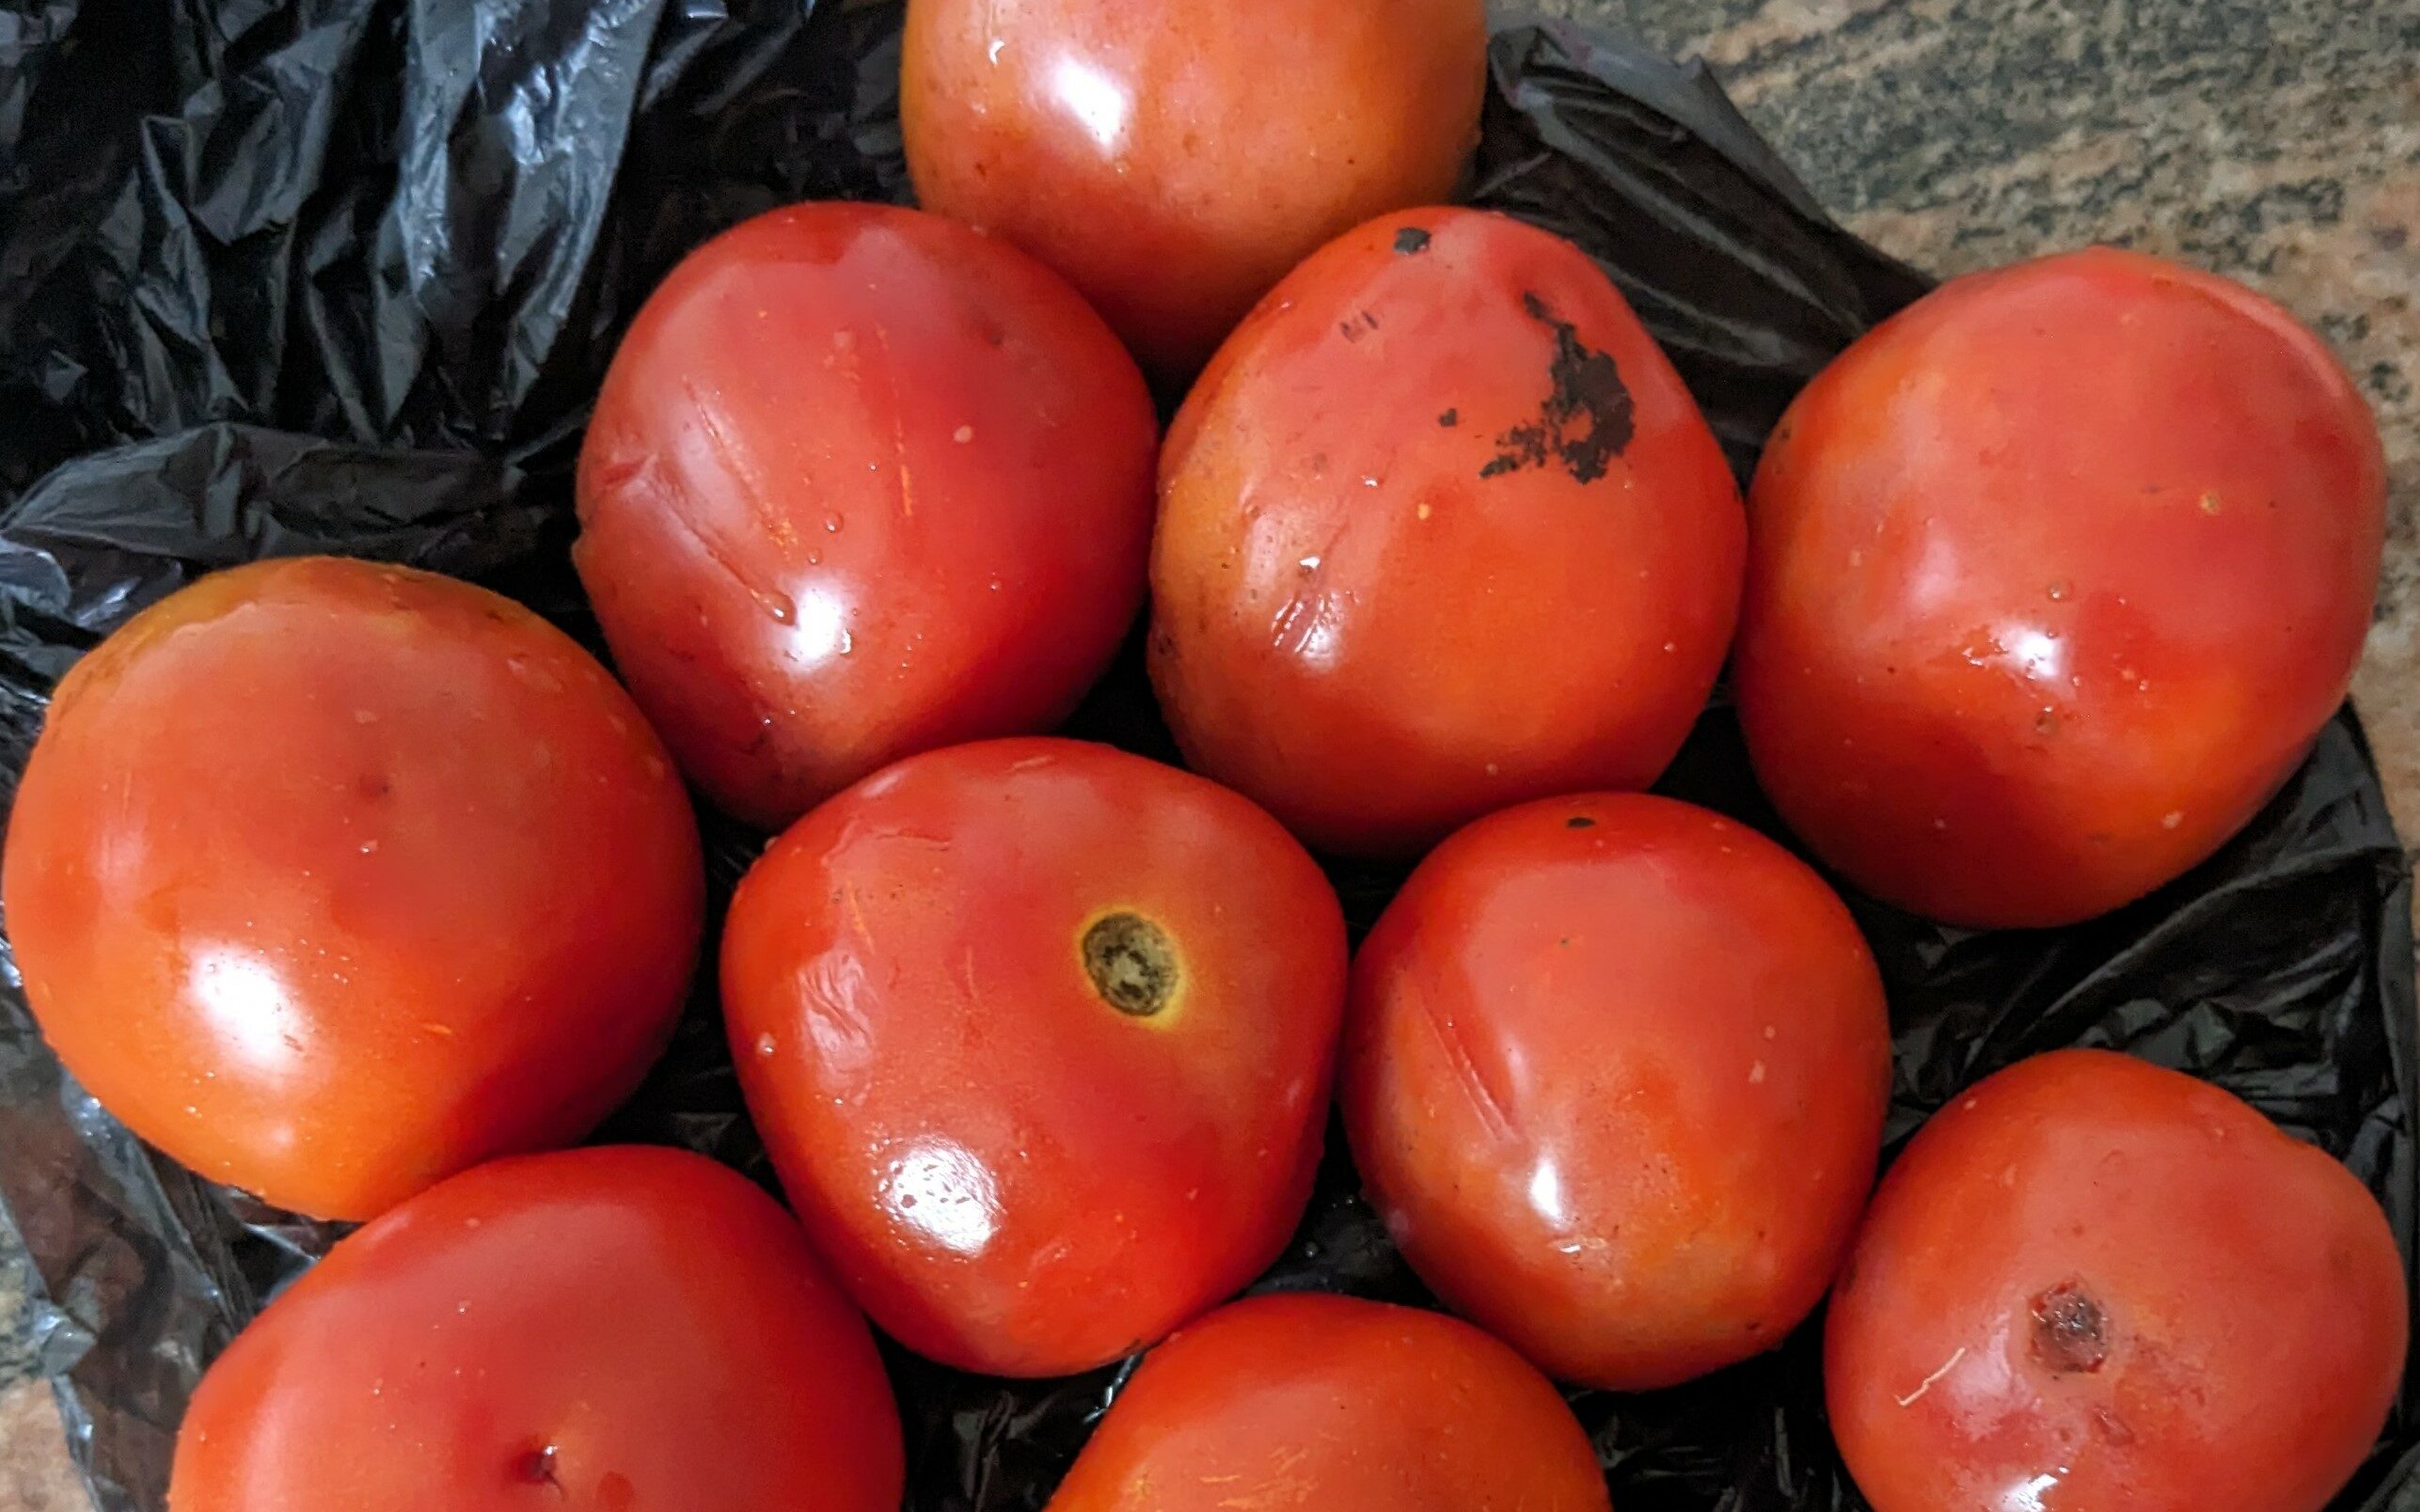 REPORTER'S DIARY: At Lagos Market Known for Cheap Food Items, I Got 10 Tomatoes for N1000